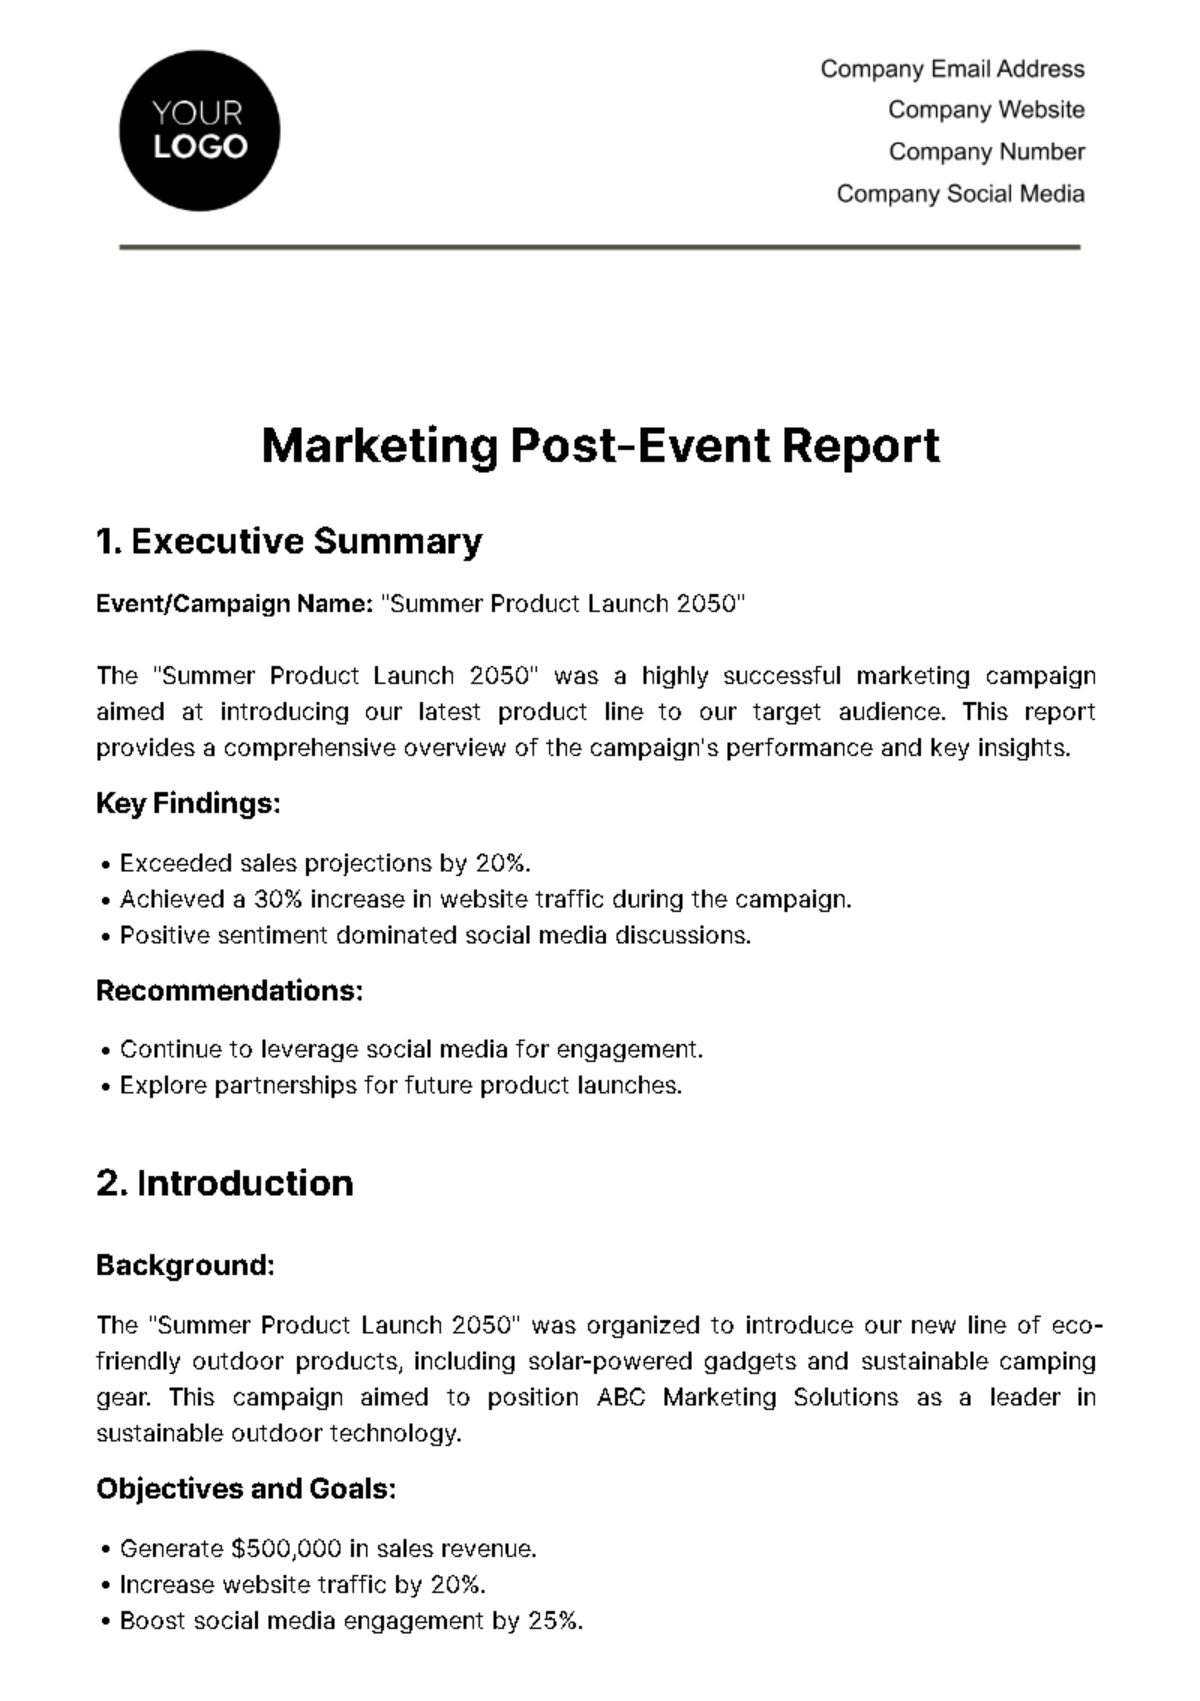 Marketing Post-Event Report Template